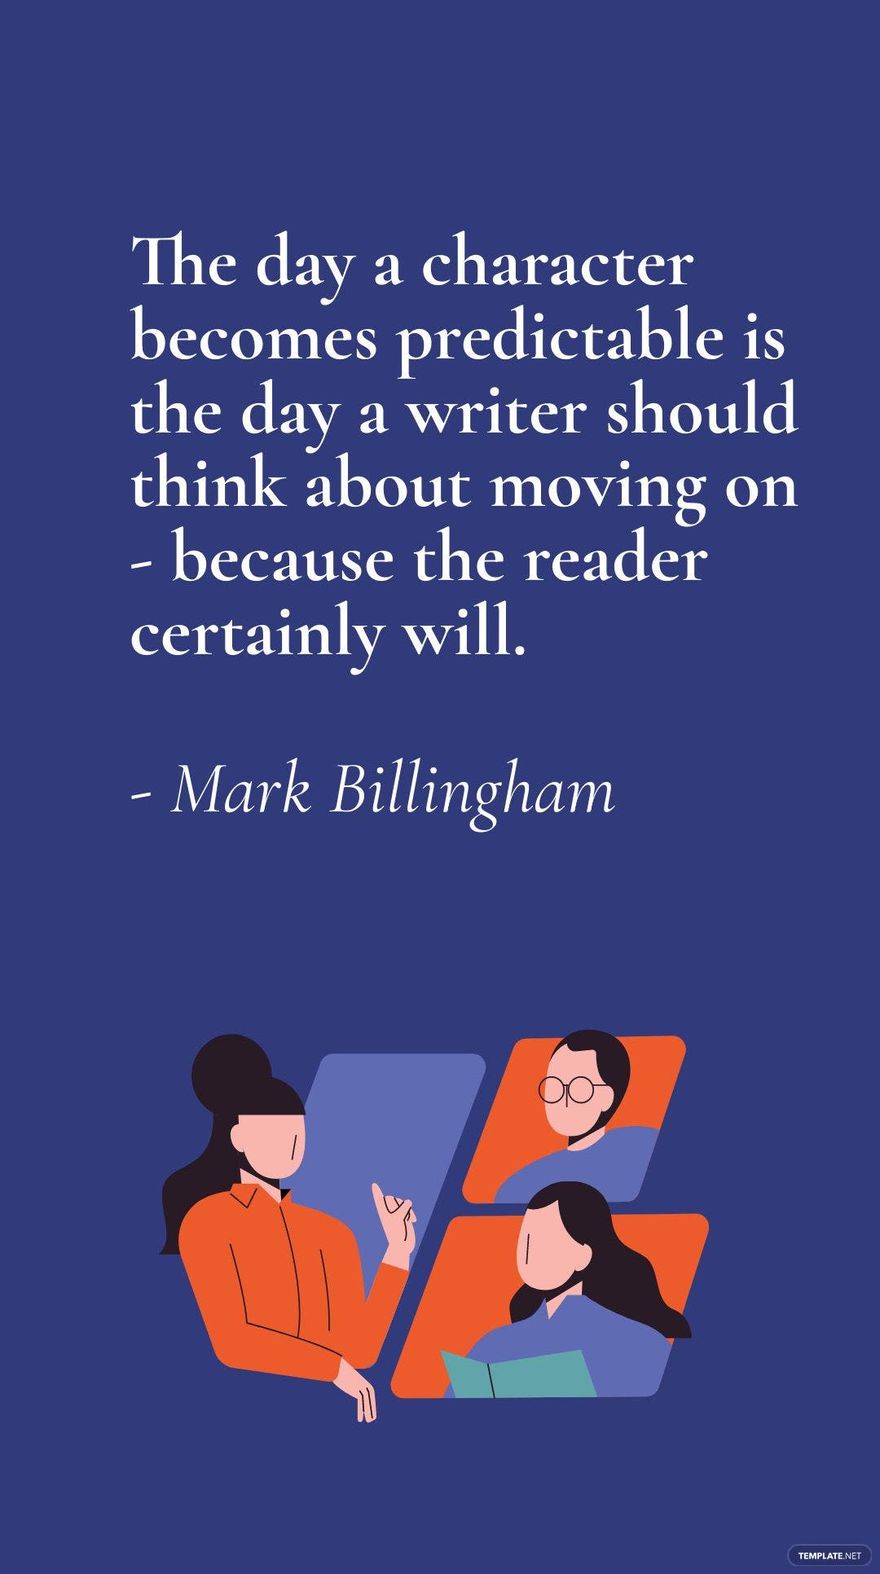 Mark Billingham - The day a character becomes predictable is the day a writer should think about moving on - because the reader certainly will.